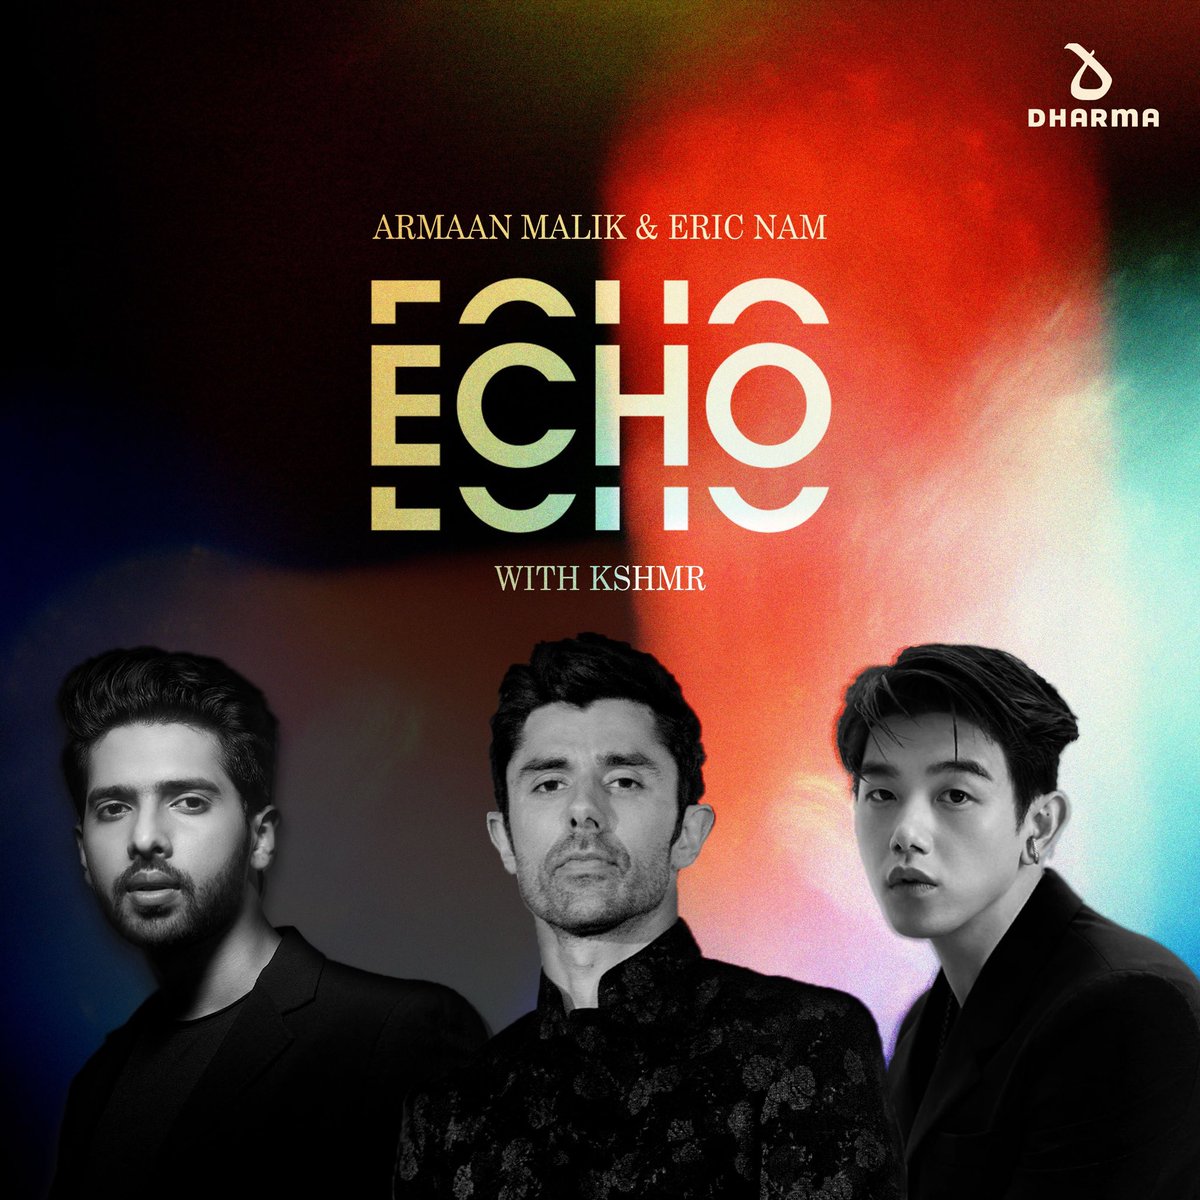 Echo coming this Friday with my guys. Are we ready?
⠀
Pre-save the single here ➡️: dharmamusic.release.link/echo-with-kshmr